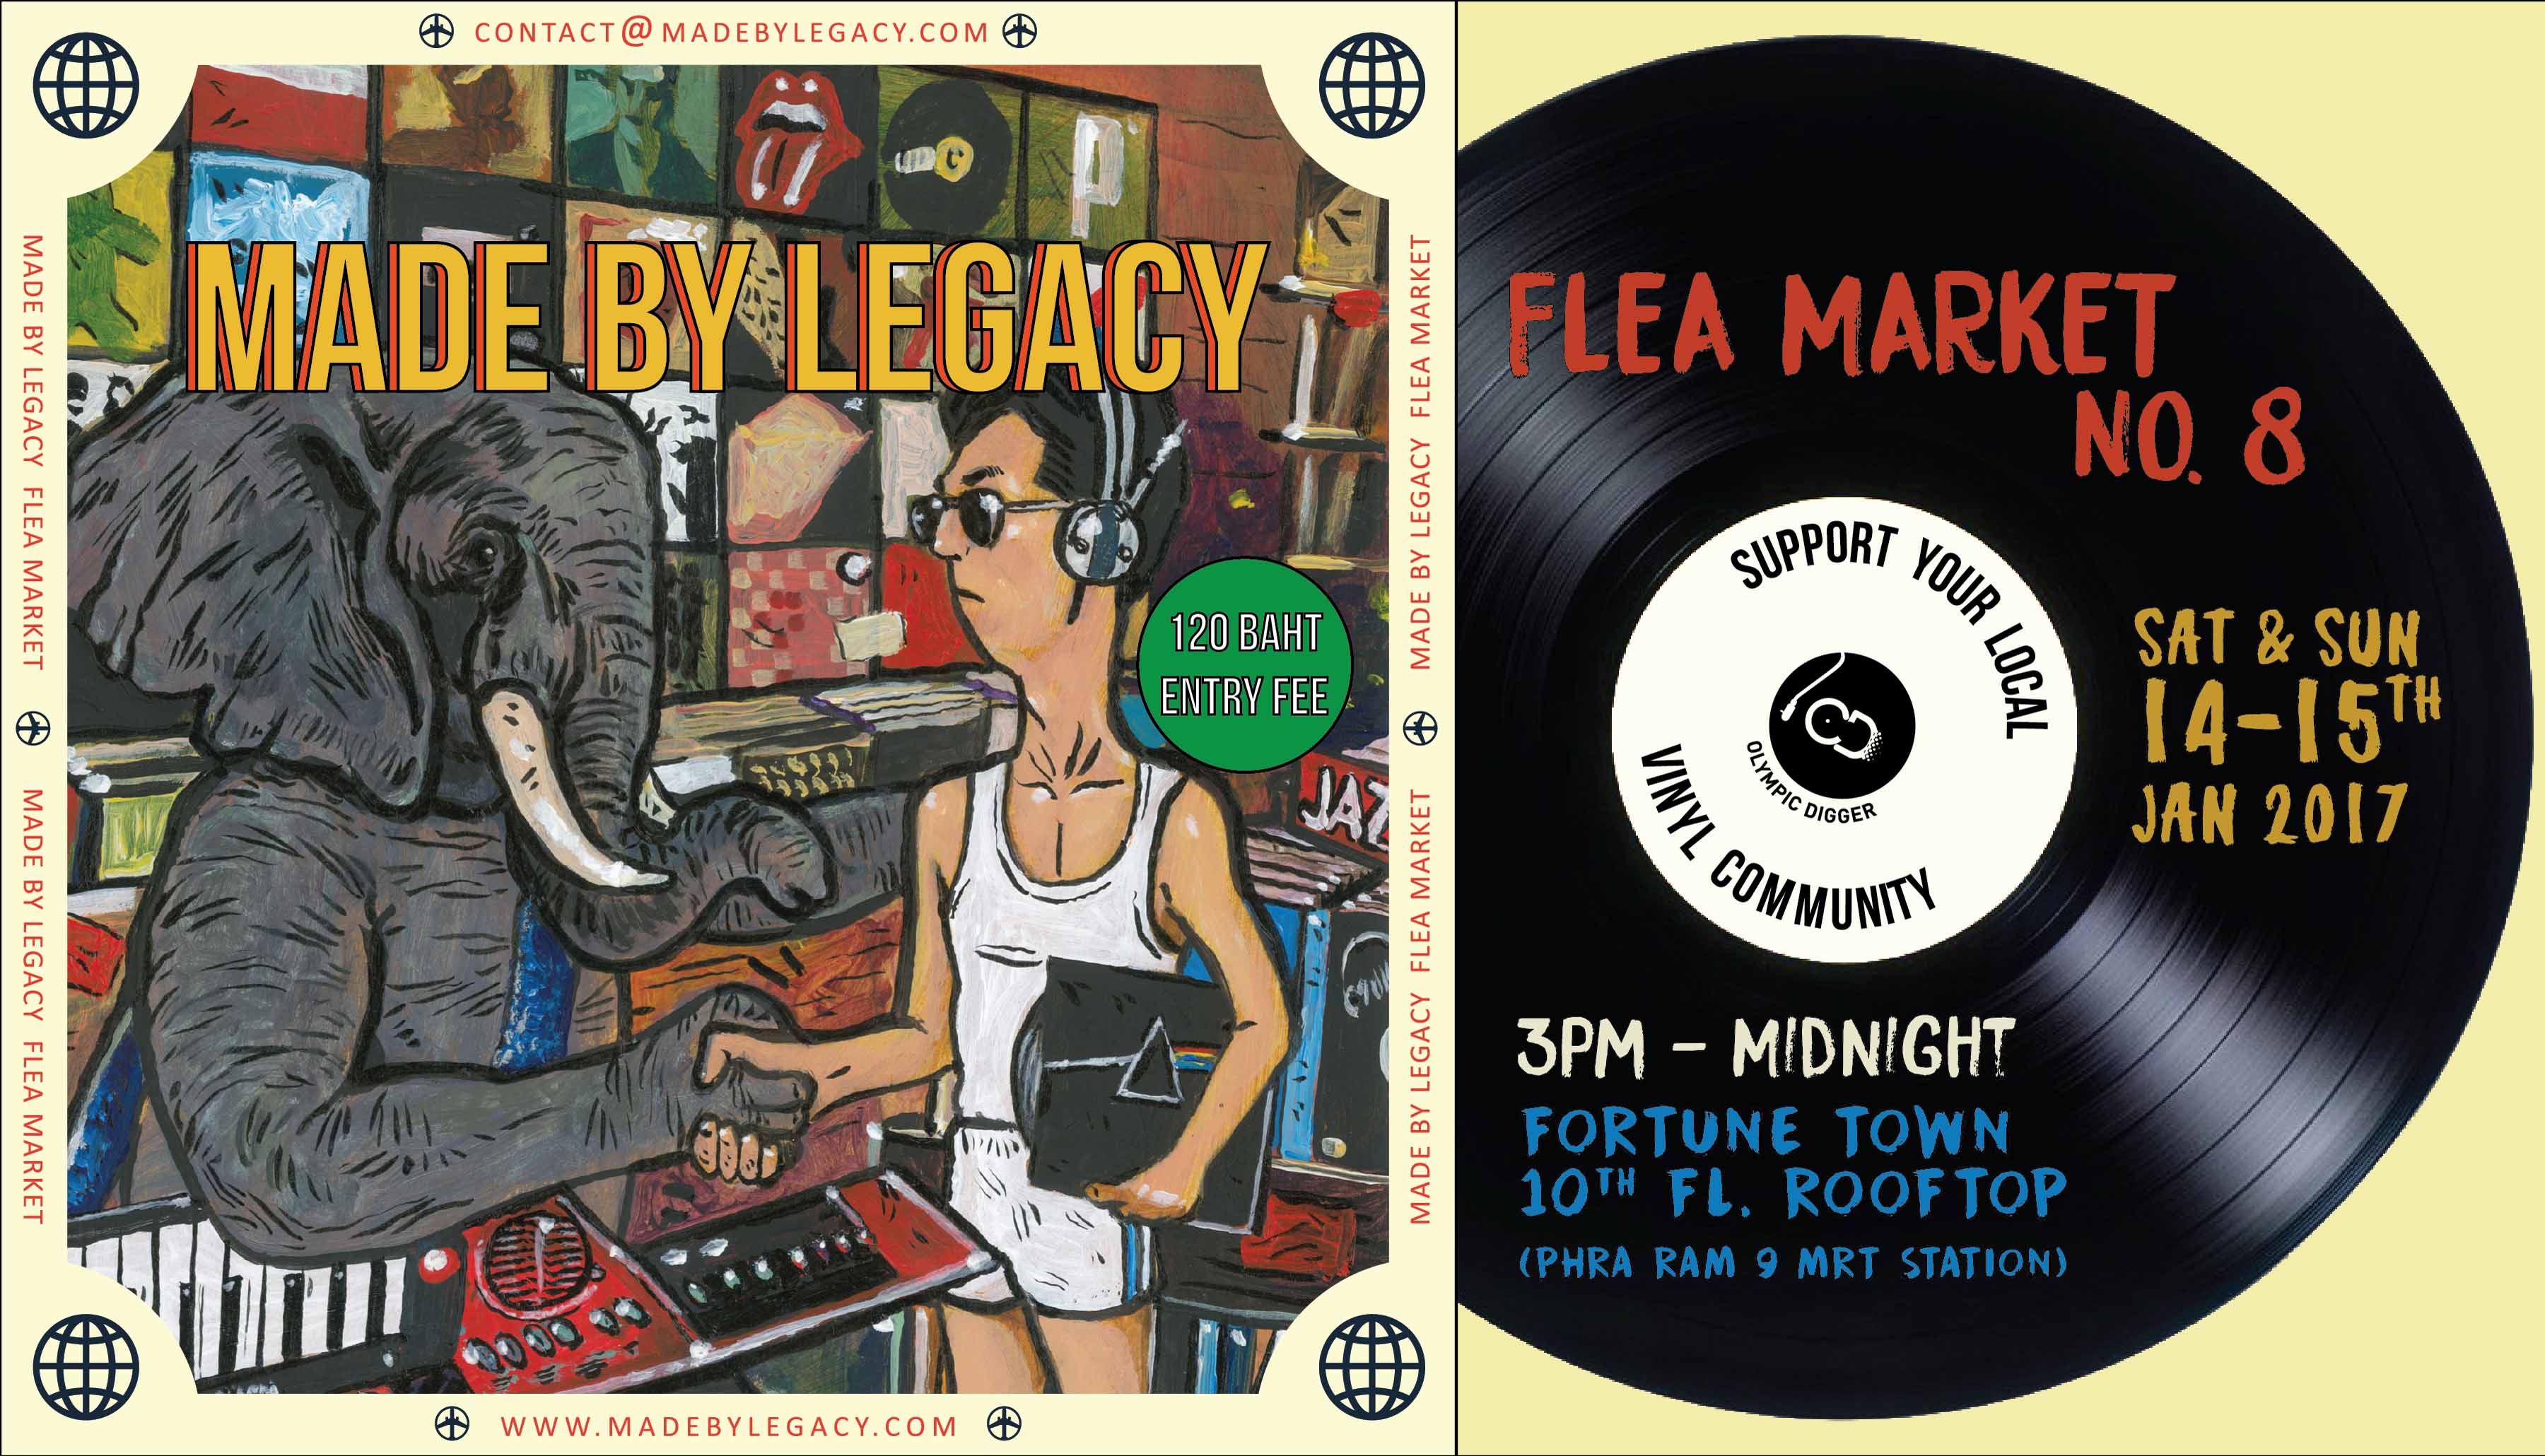 MADE BY LEGACY FLEA MARKET NO. 8 is coming up next week.